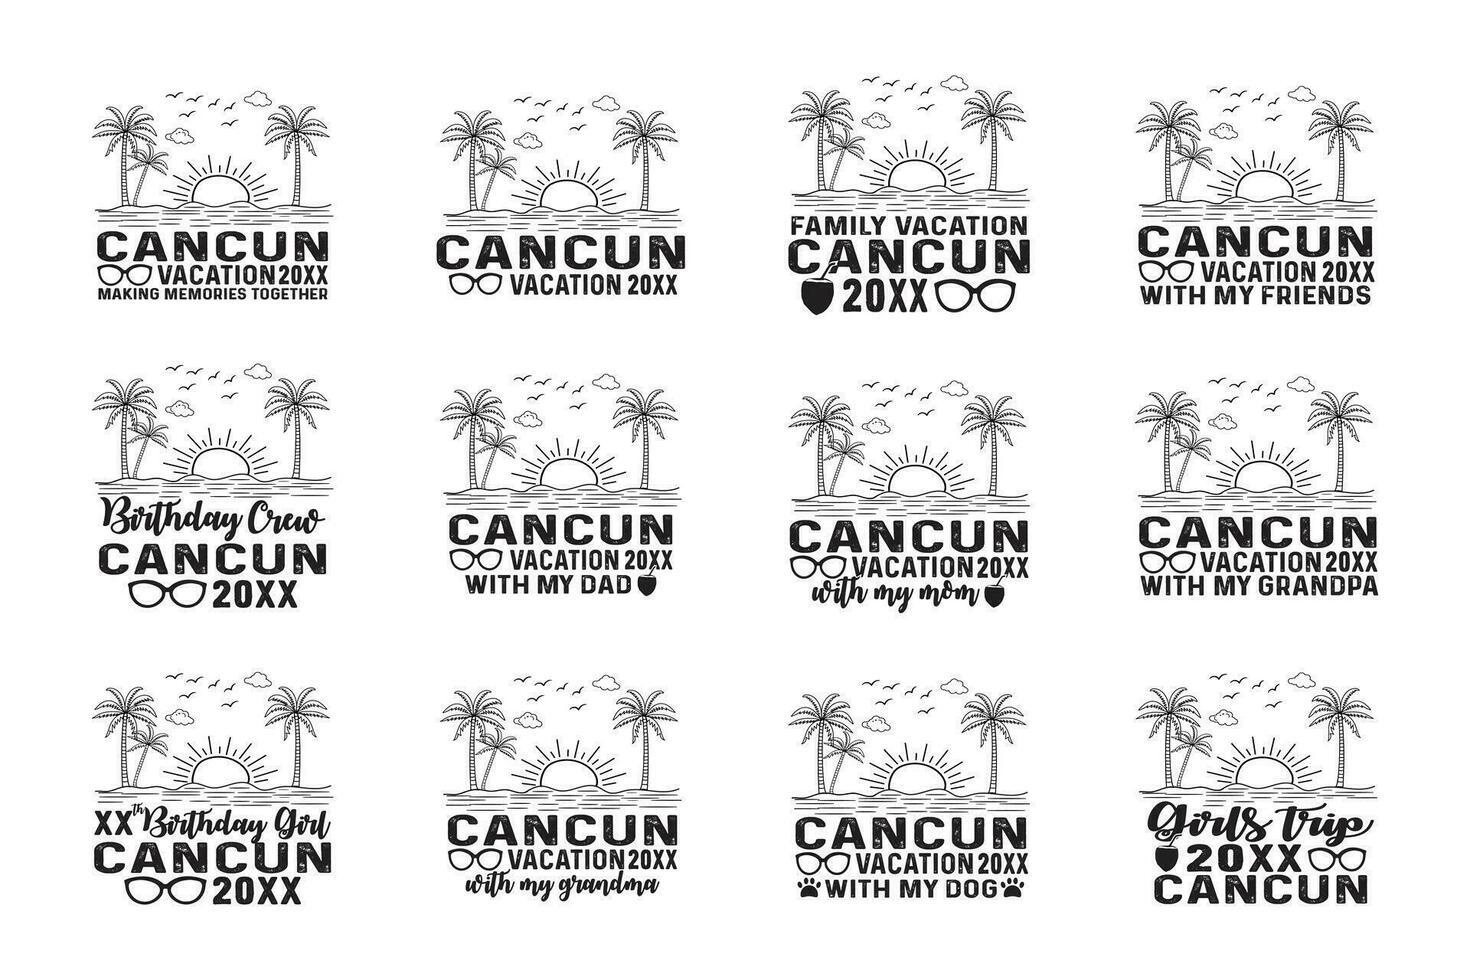 Cancun Vacation 2023 Mexico Beach vintage Retro sunset T-shirt Design, with my family,friends enjoy summer Vibes Memories Together shirt poster print item, typography style svg cut file vector